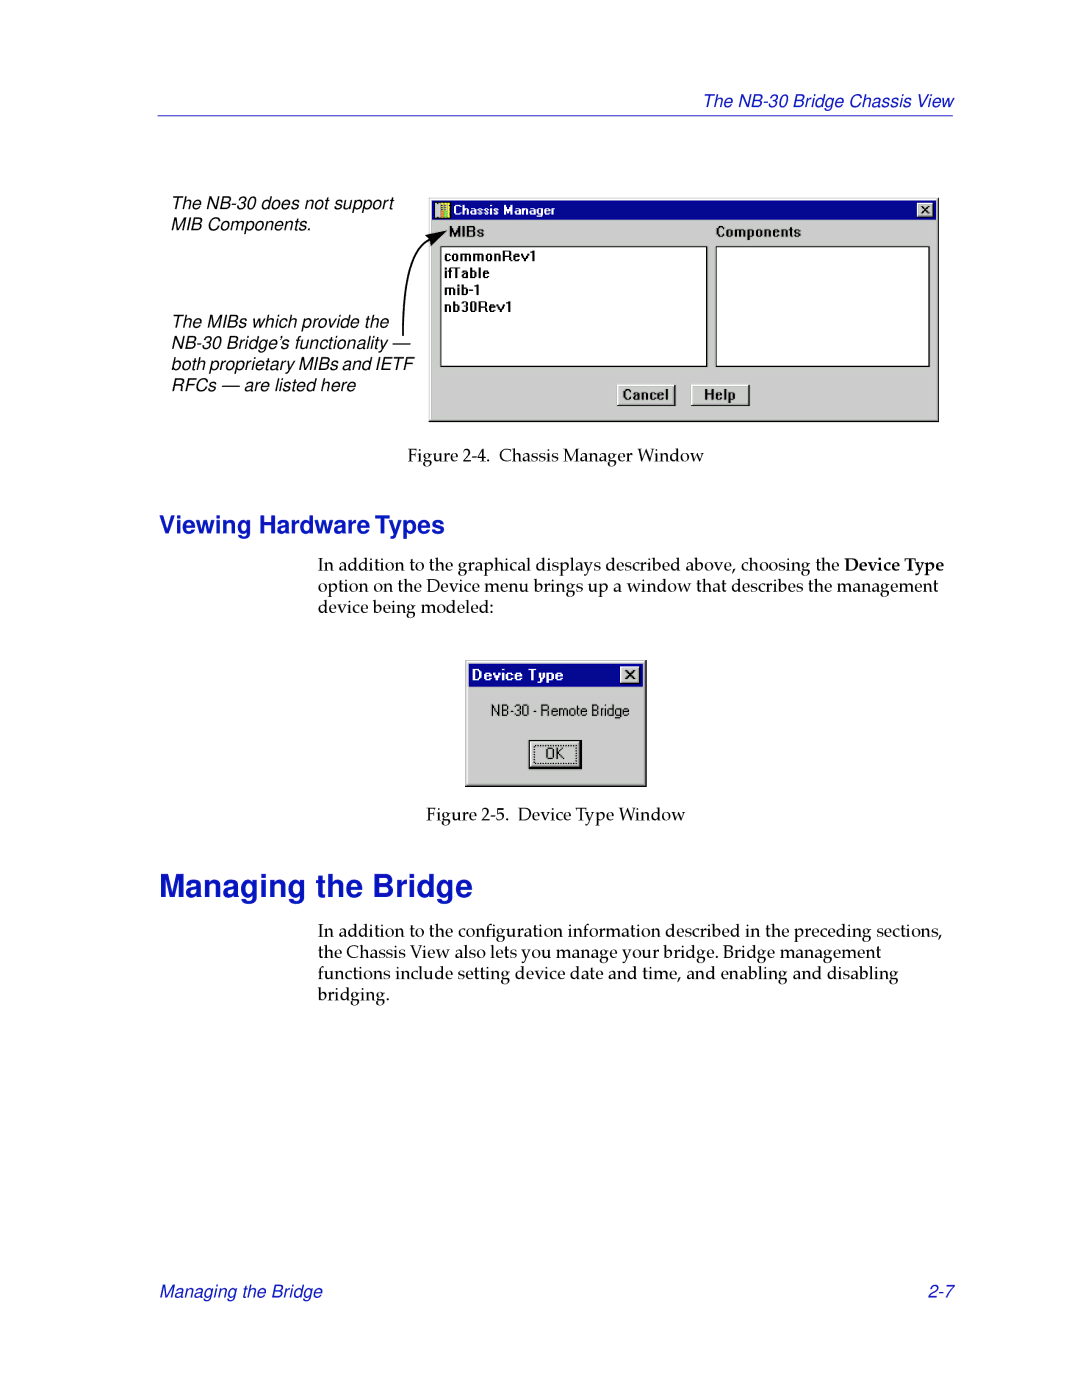 Cabletron Systems NB30 manual Managing the Bridge, Viewing Hardware Types 